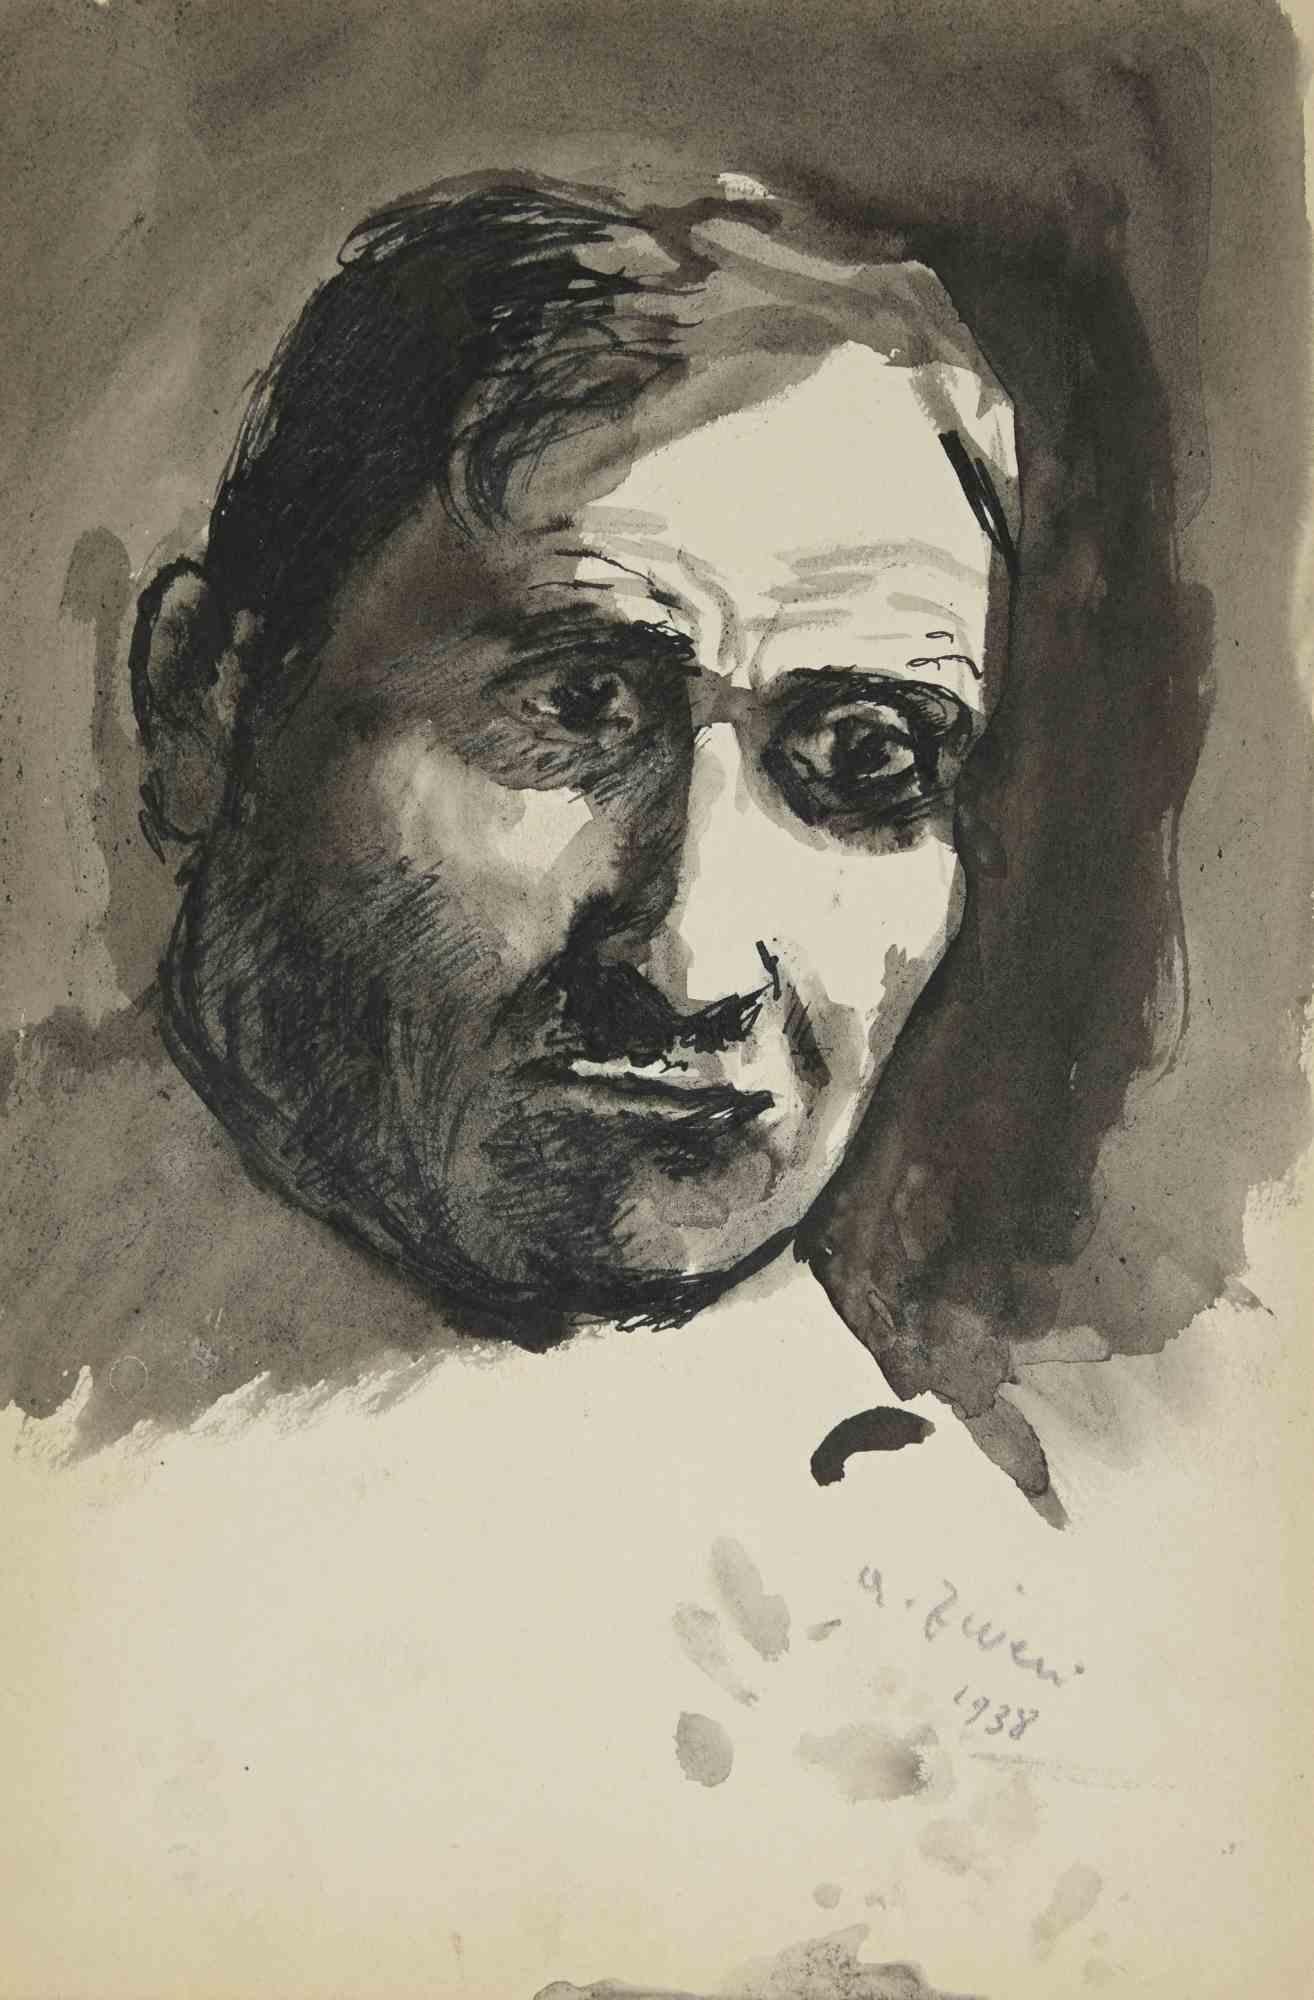 Portrait is a drawing realized by Alberto Ziveri in 1938.

Ink and watercolor on paper.

Hand-signed and dated.

In good conditions.

The artwork is represented through deft strokes masterly.

Alberto Ziveri (Rome,1908 – 1990), the Italian painter